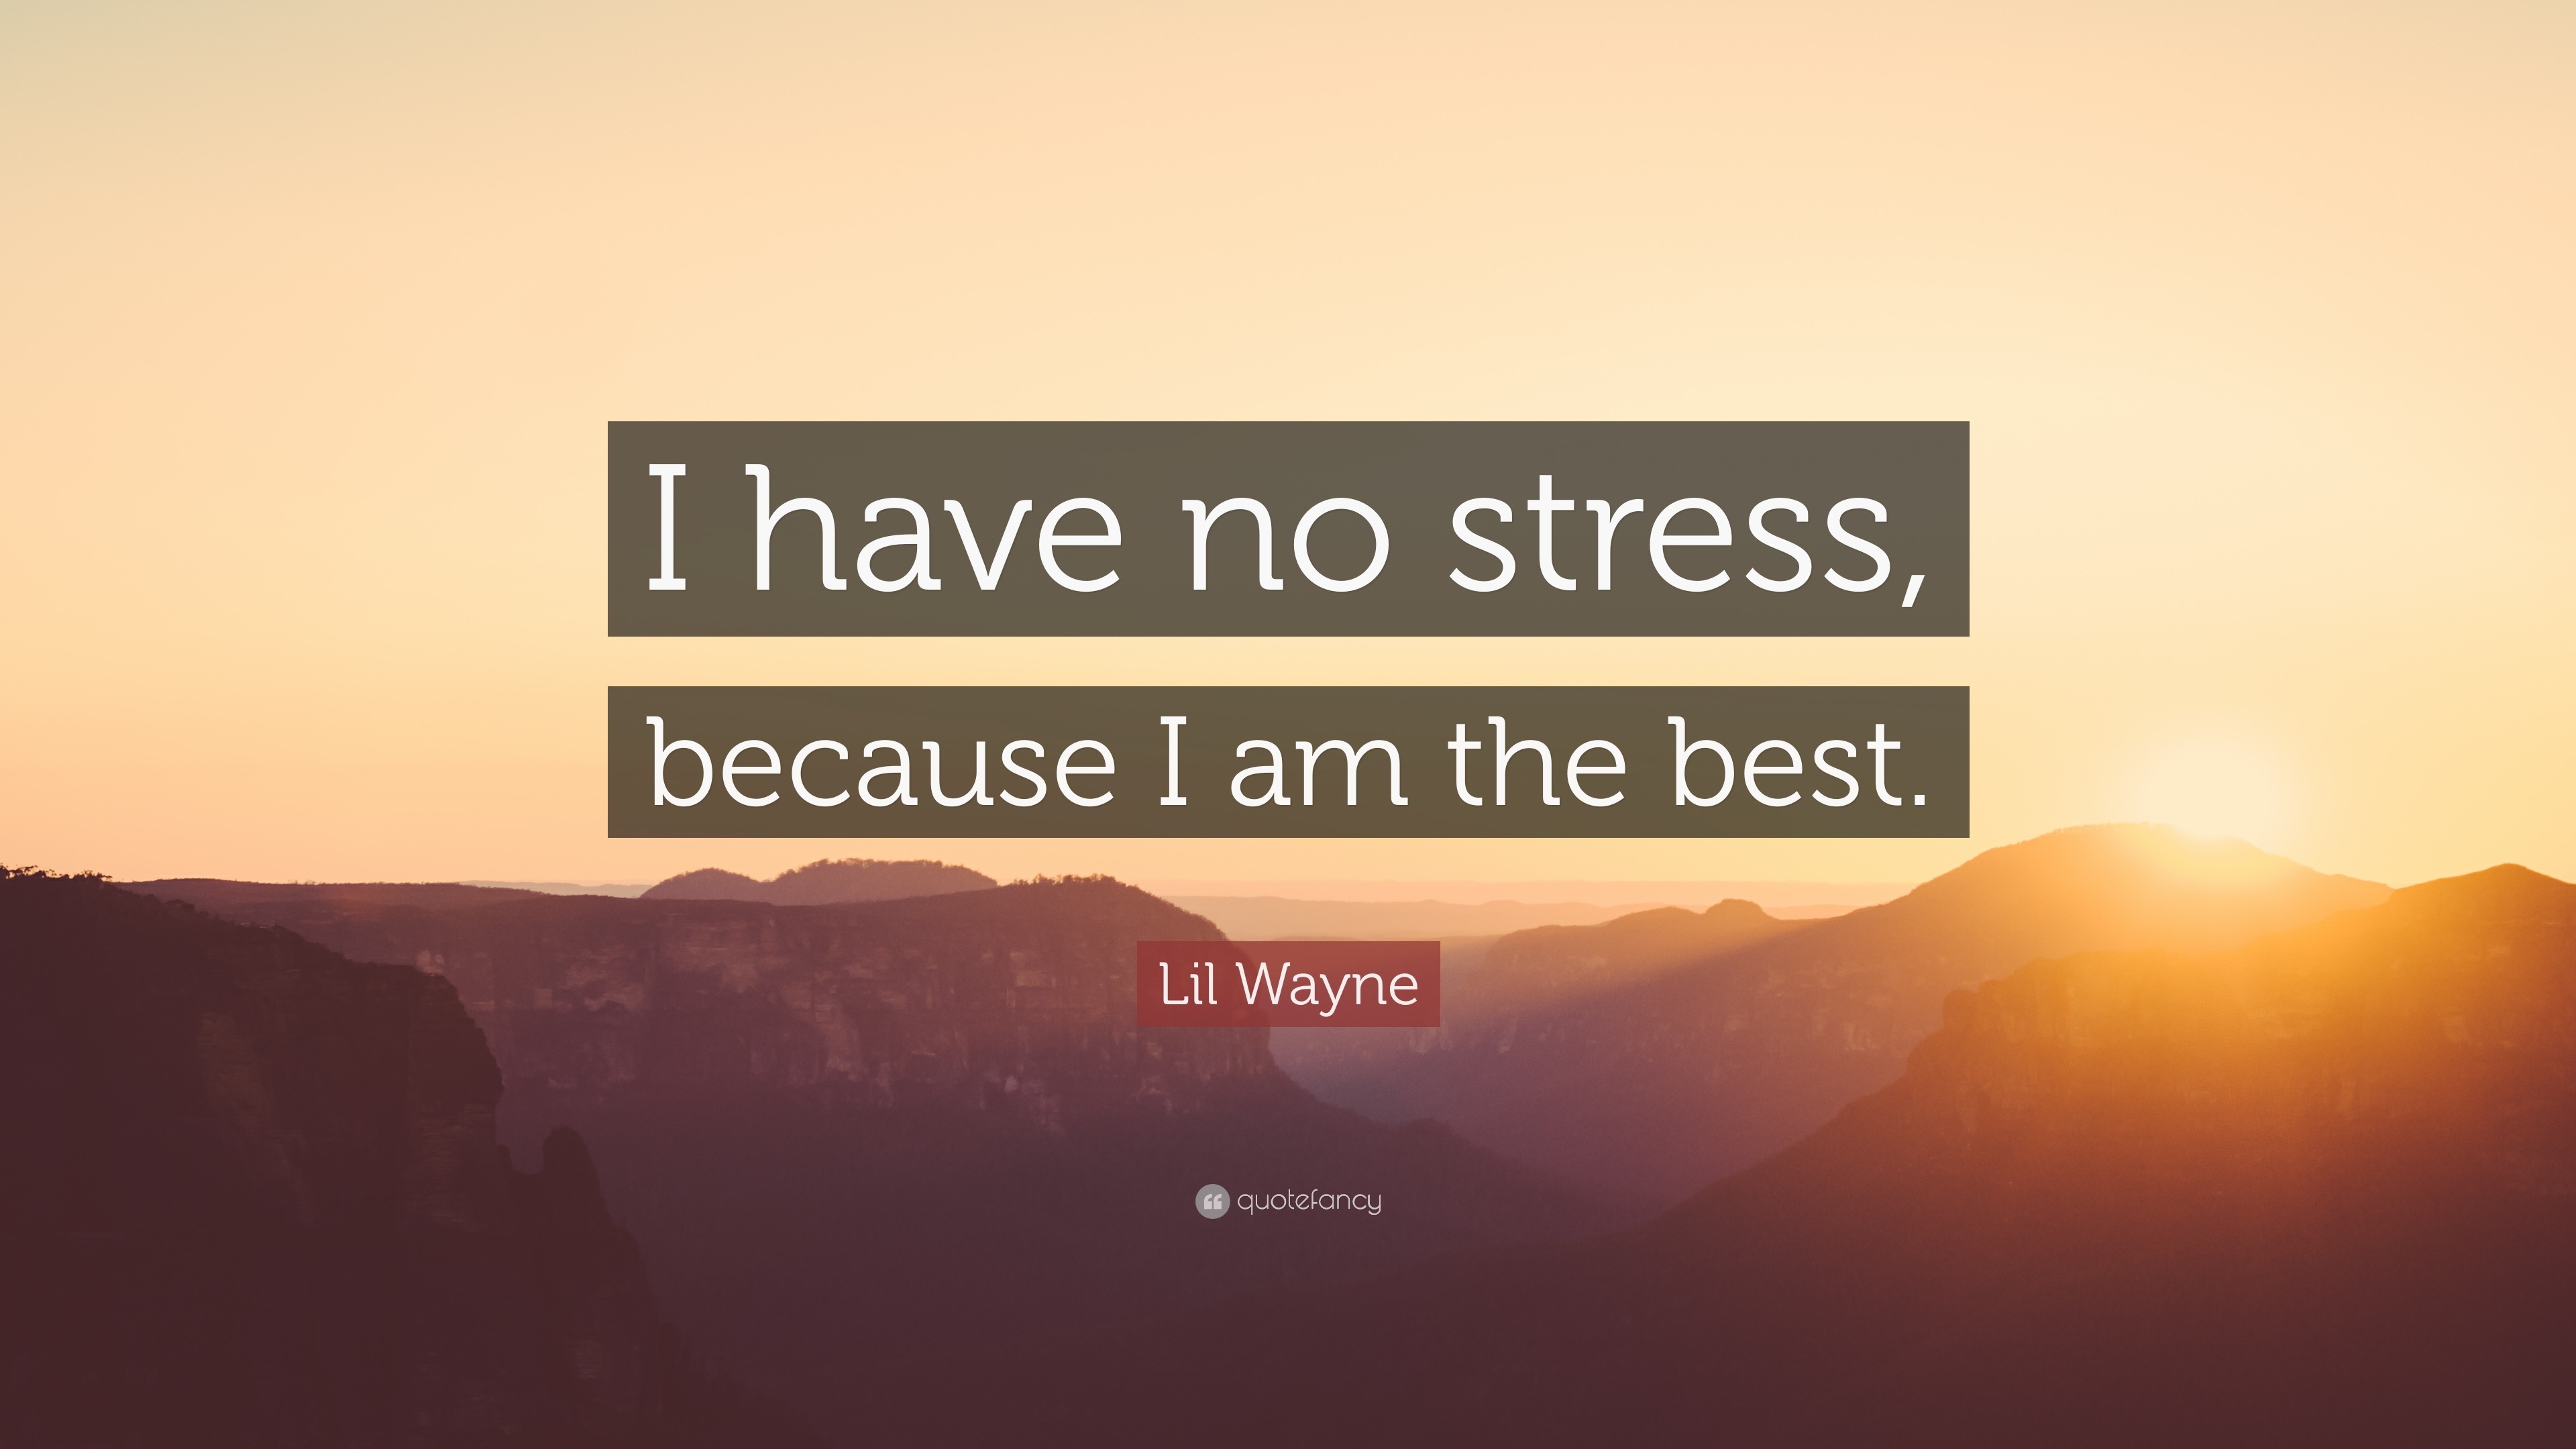 https://quotefancy.com/media/wallpaper/3840x2160/81348-Lil-Wayne-Quote-I-have-no-stress-because-I-am-the-best.jpg